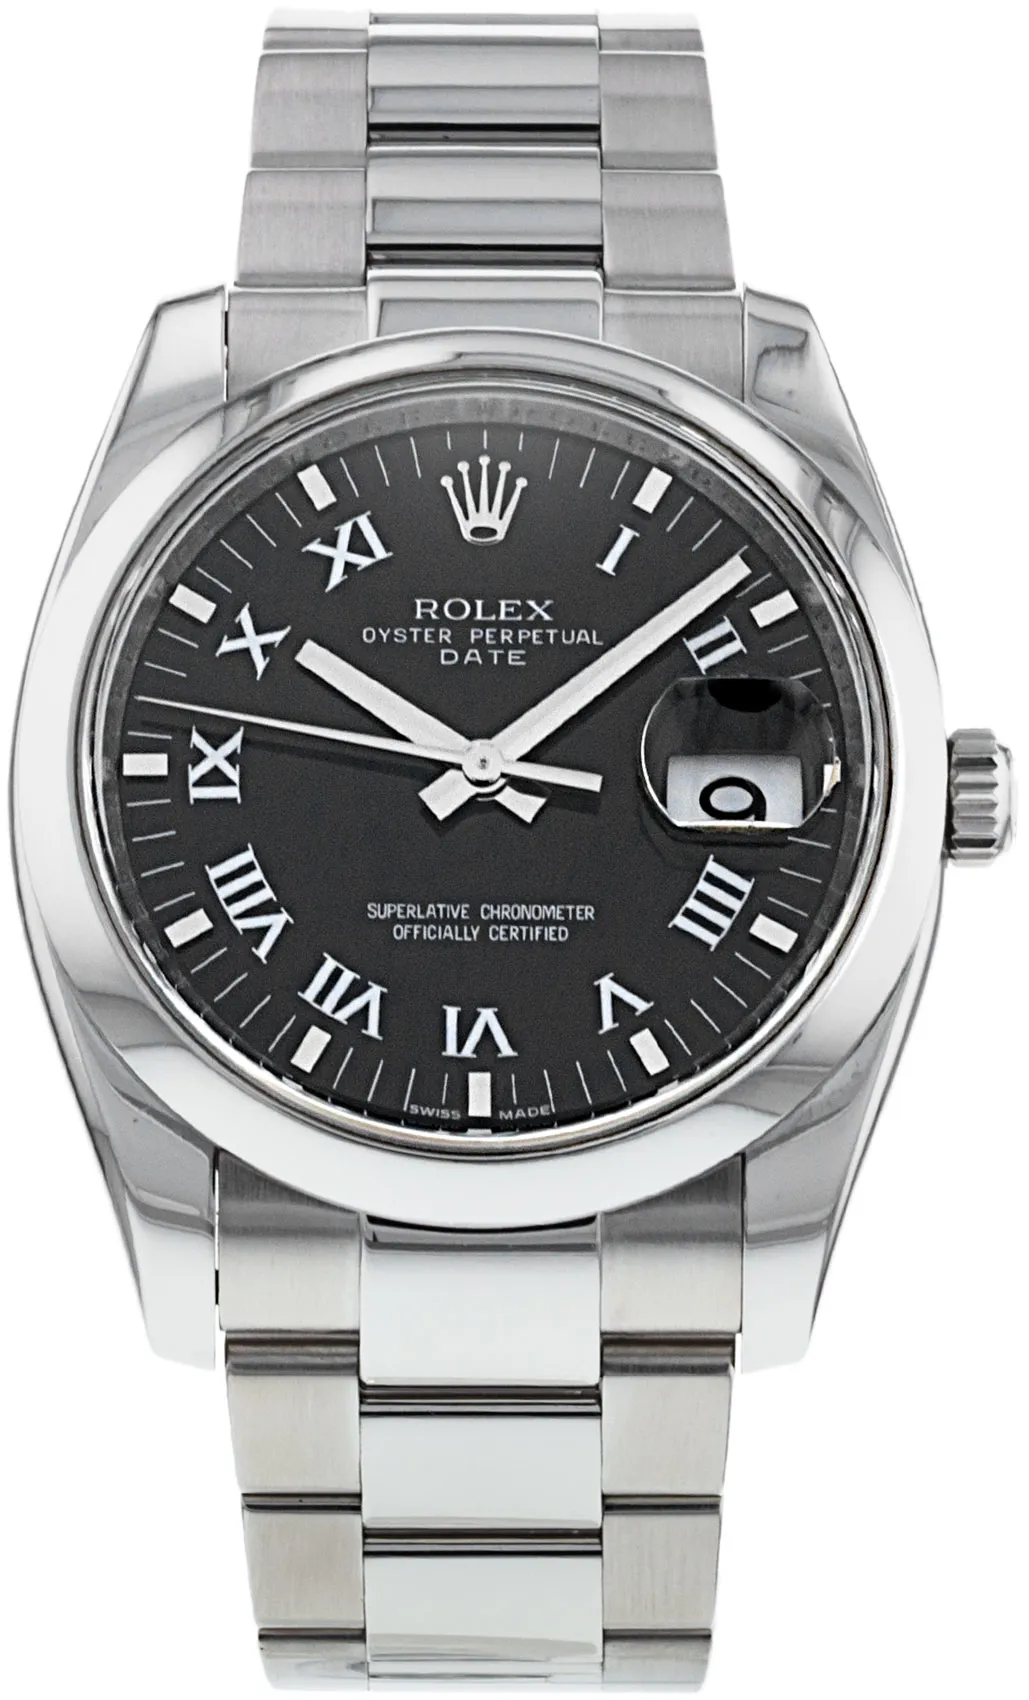 Rolex Oyster Perpetual Date 115200 34mm Stainless steel •